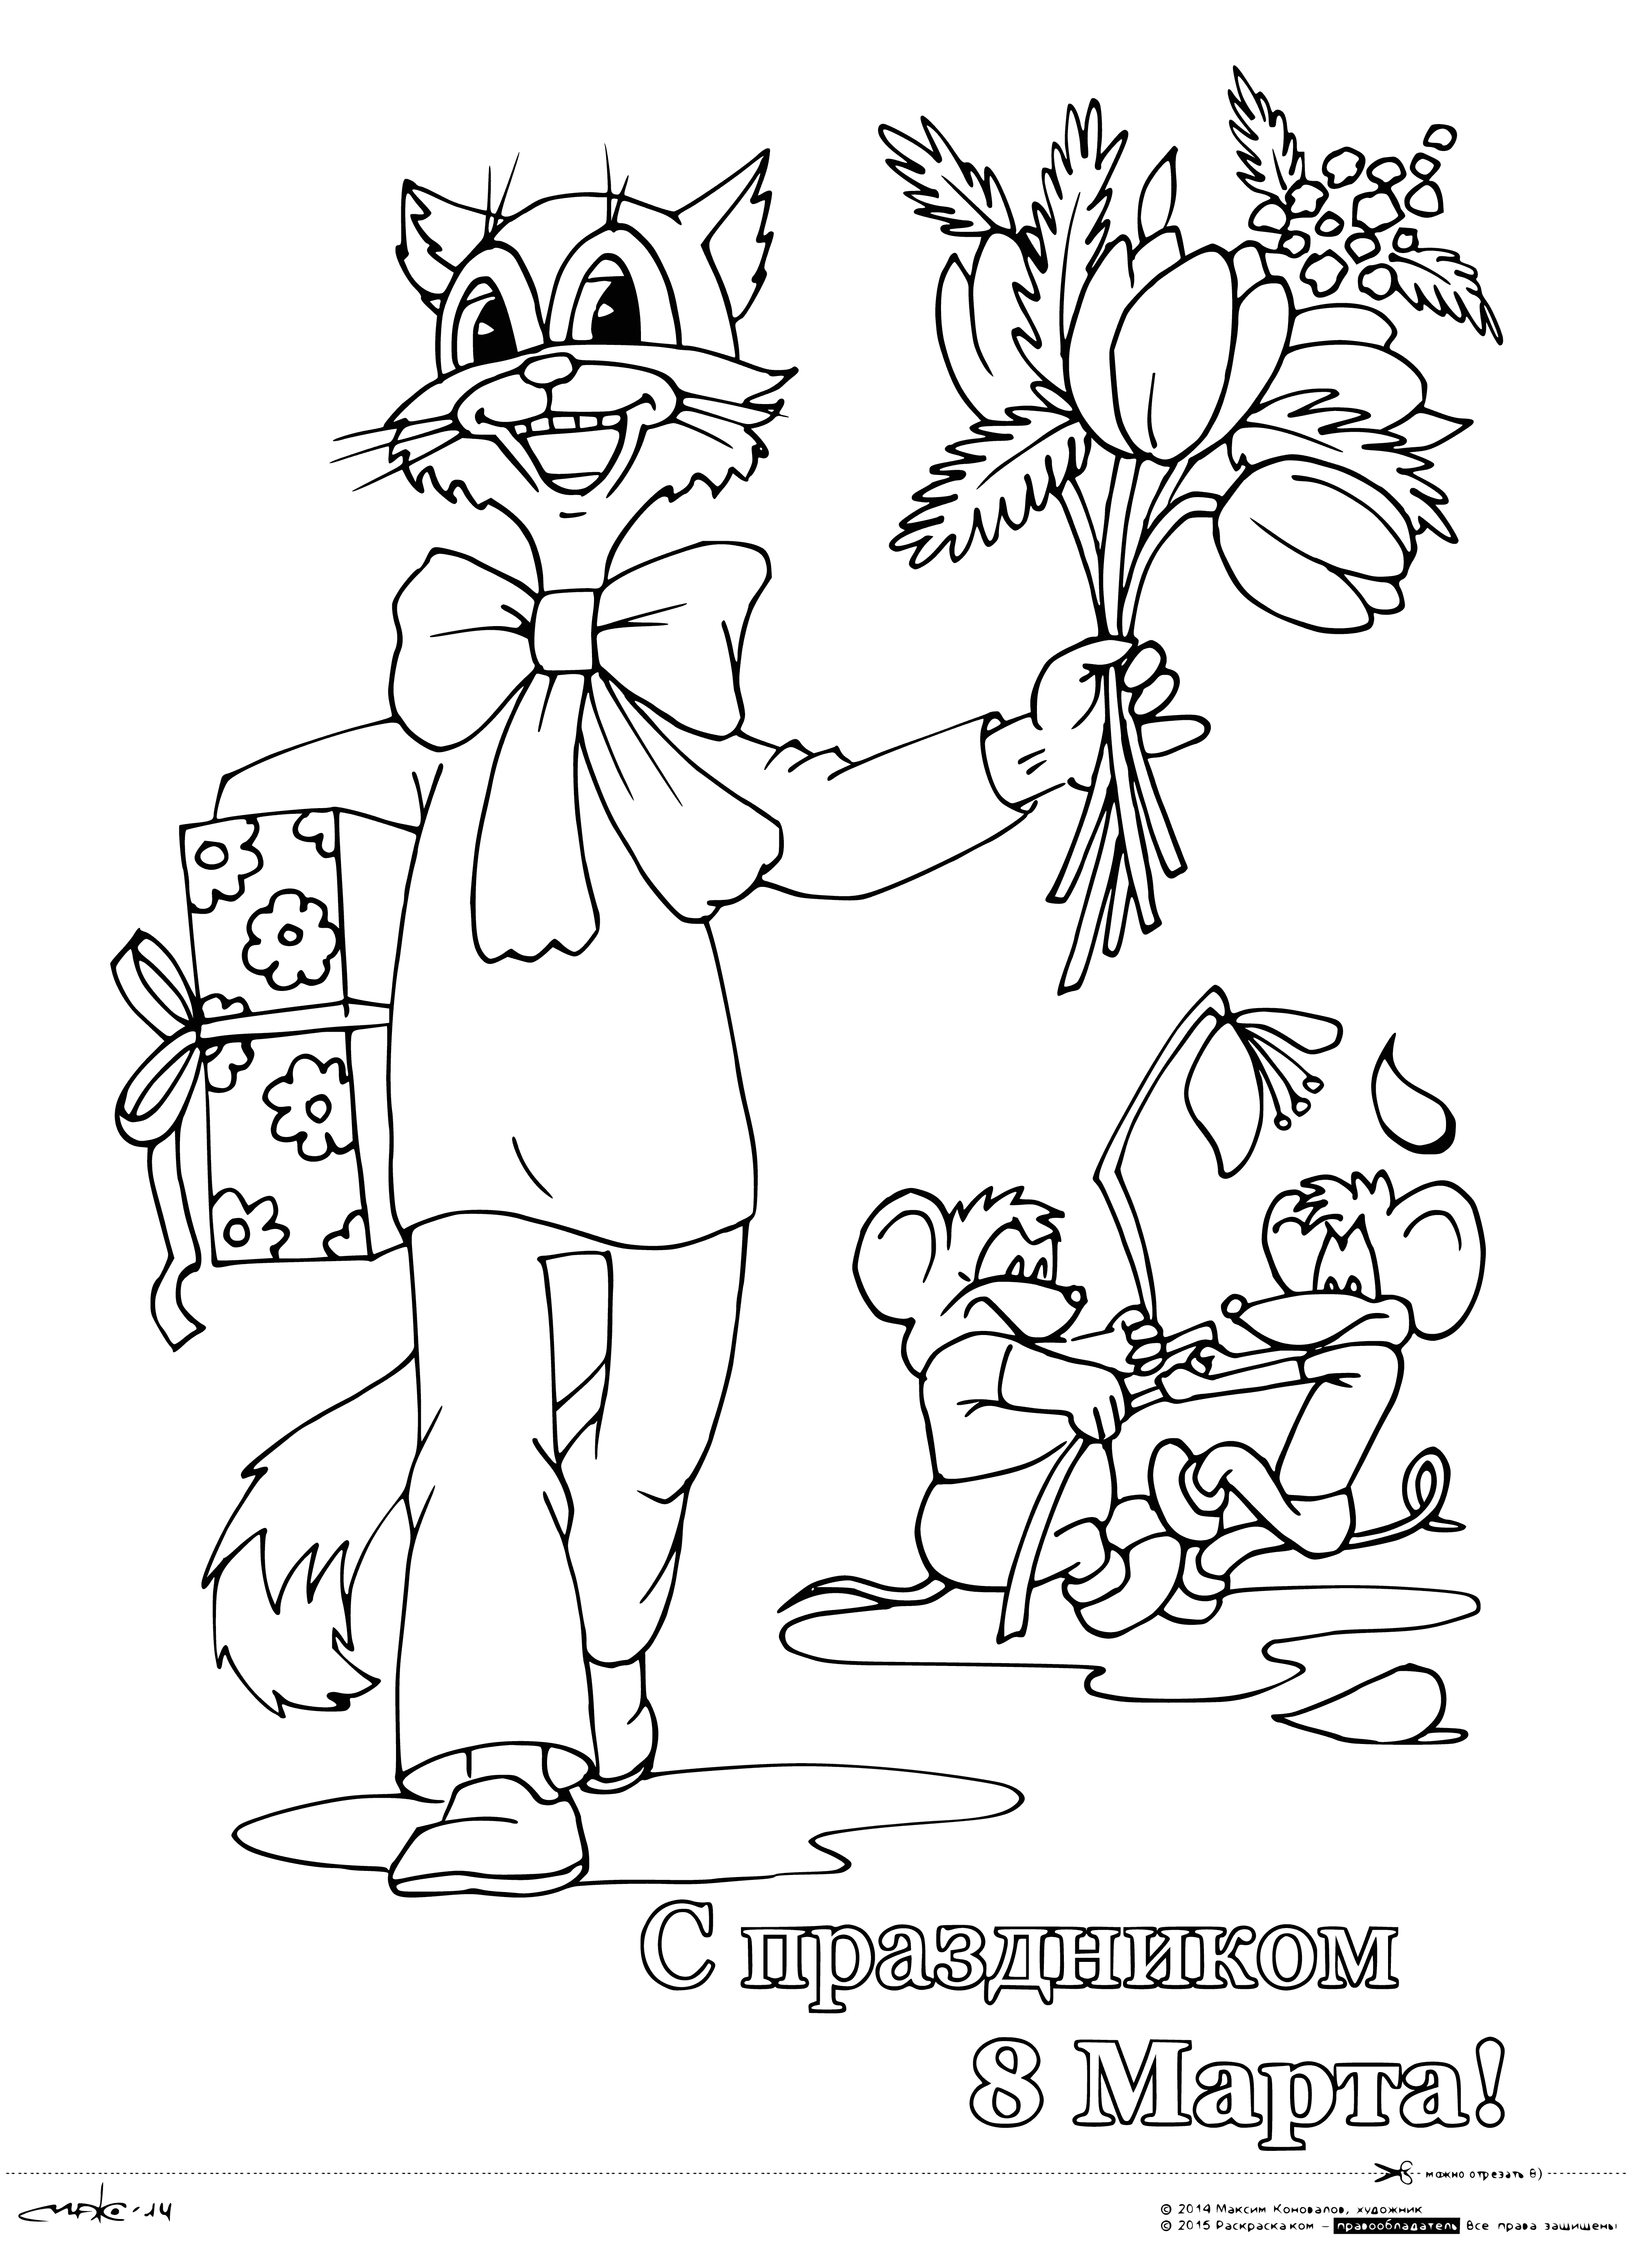 coloring page: Leopold, a cat, is excitedly holding a bouquet of colorful flowers (pink, purple, yellow). Coloring page full of joy!